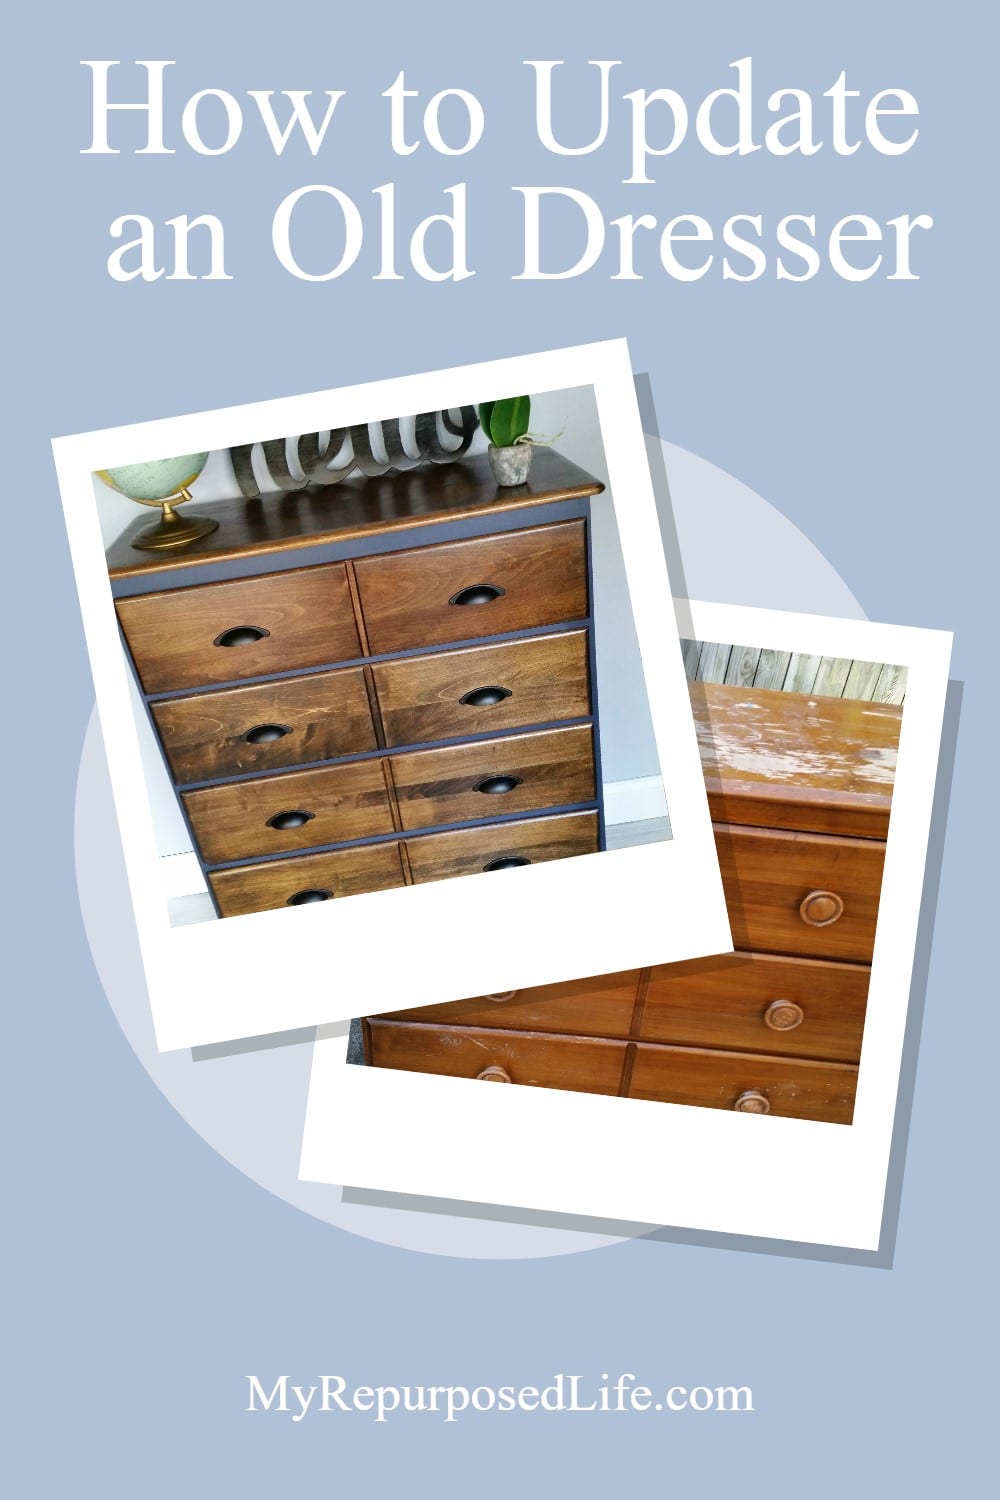 How to update a dresser using old furniture. Removing the front trim helps to modify the look of this vintage dresser. Photo tutorial included. #MyRepurposedLife #repurposed #furniture #update #dresser #modern via @repurposedlife